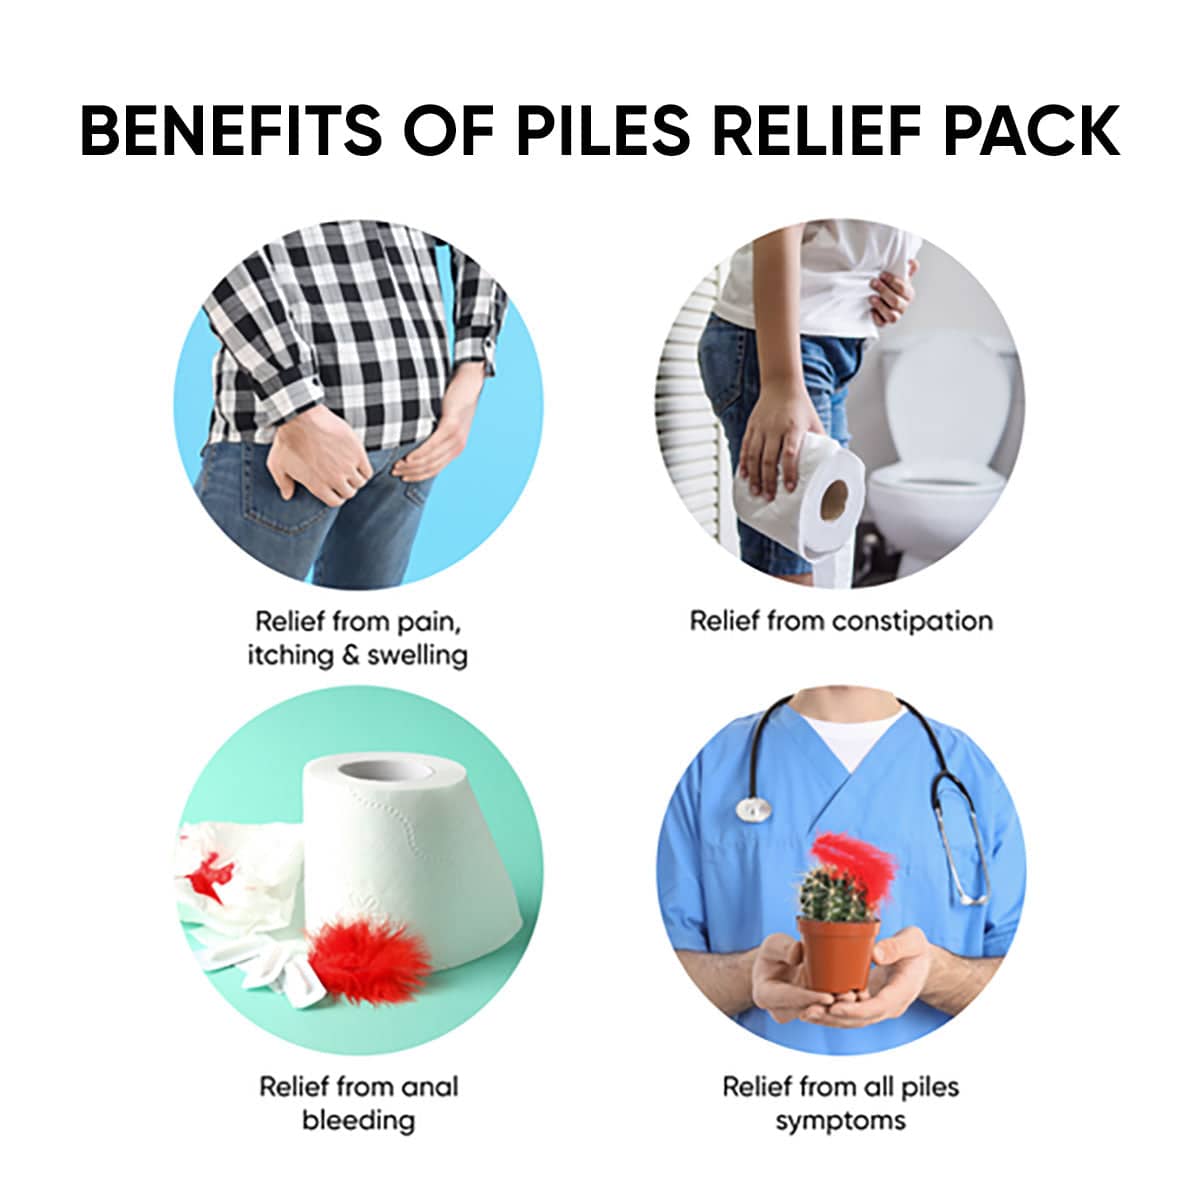 Dr. Vaidya's Piles Relief Pack for Piles and Constipation